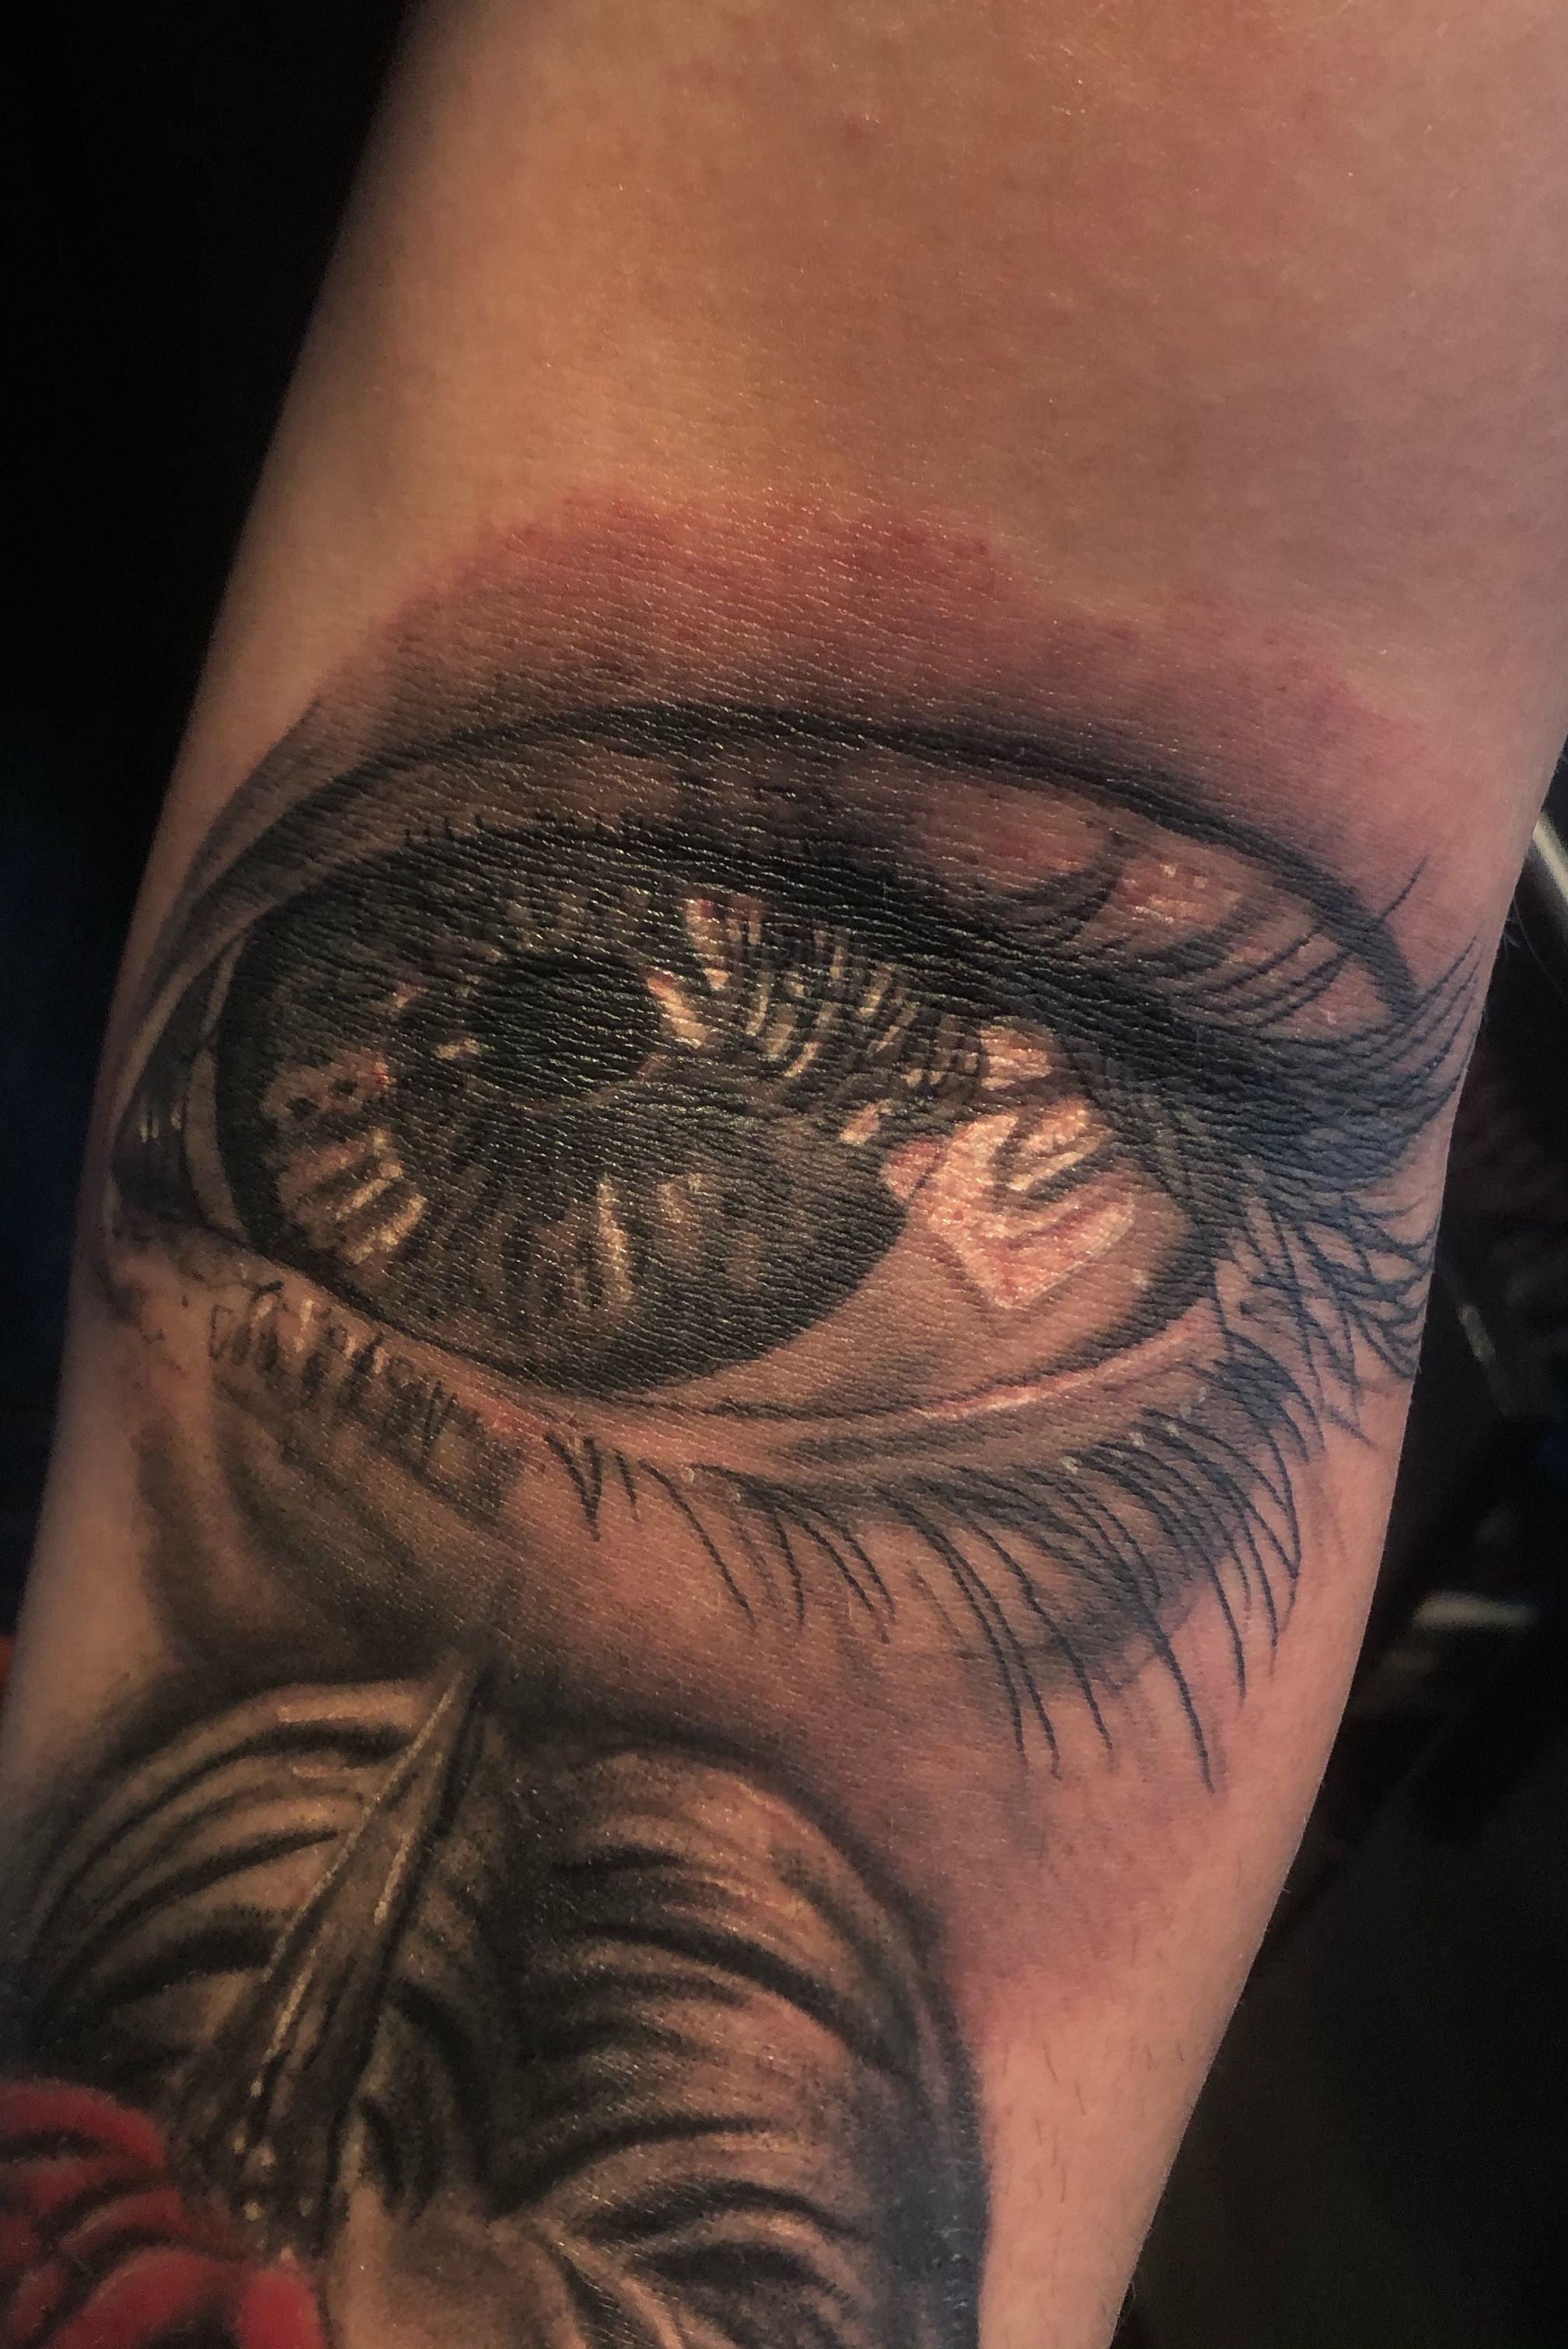 HON Tattoo Studio  Your eyes are a reflection of your spirit  All seeing  eye with filigree in the elbow ditch done by yphontattoo  Tag a friend  whod love this